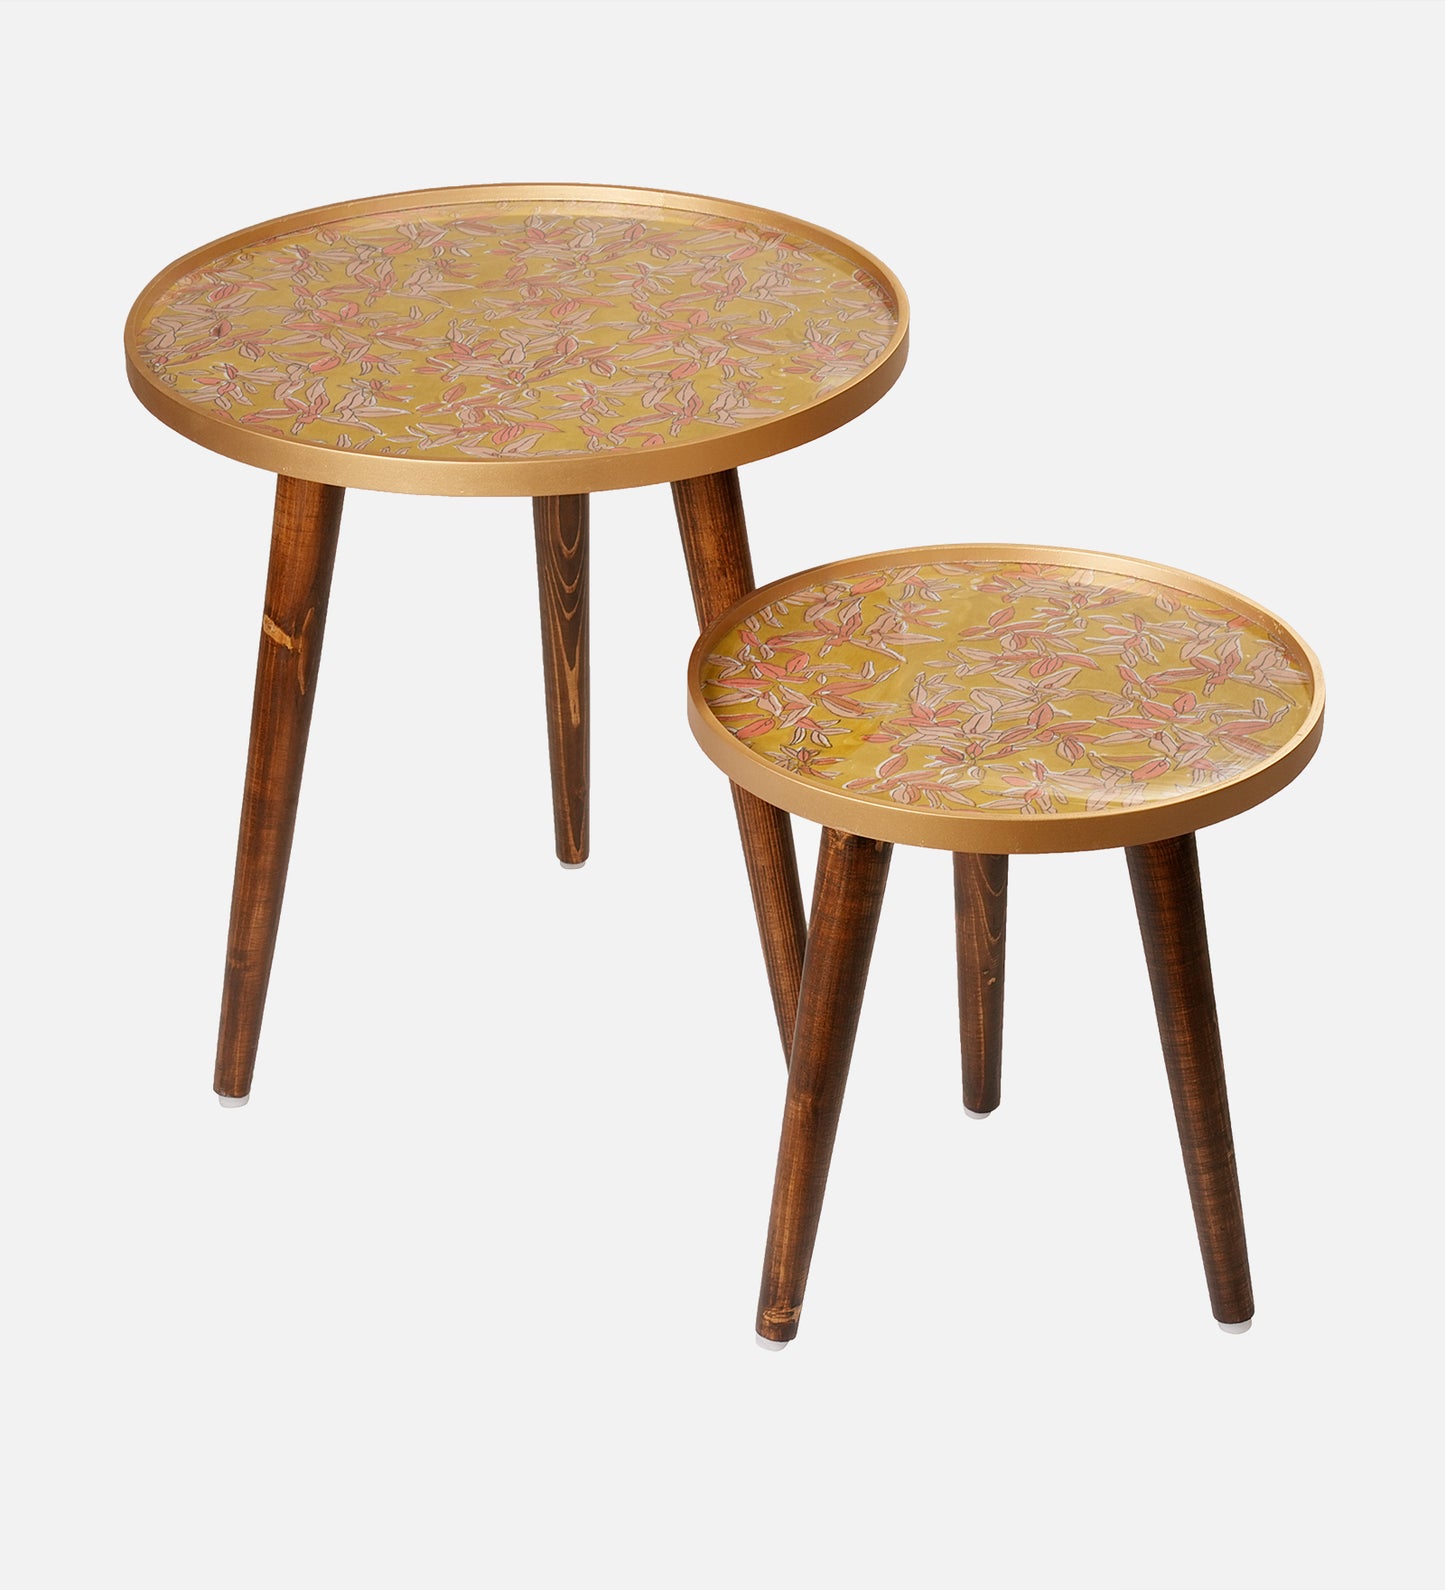 Peach and Gold Floral Round Nesting Tables with Wooden Legs, Side Tables, Wooden Tables, Living Room Decor by A Tiny Mistake